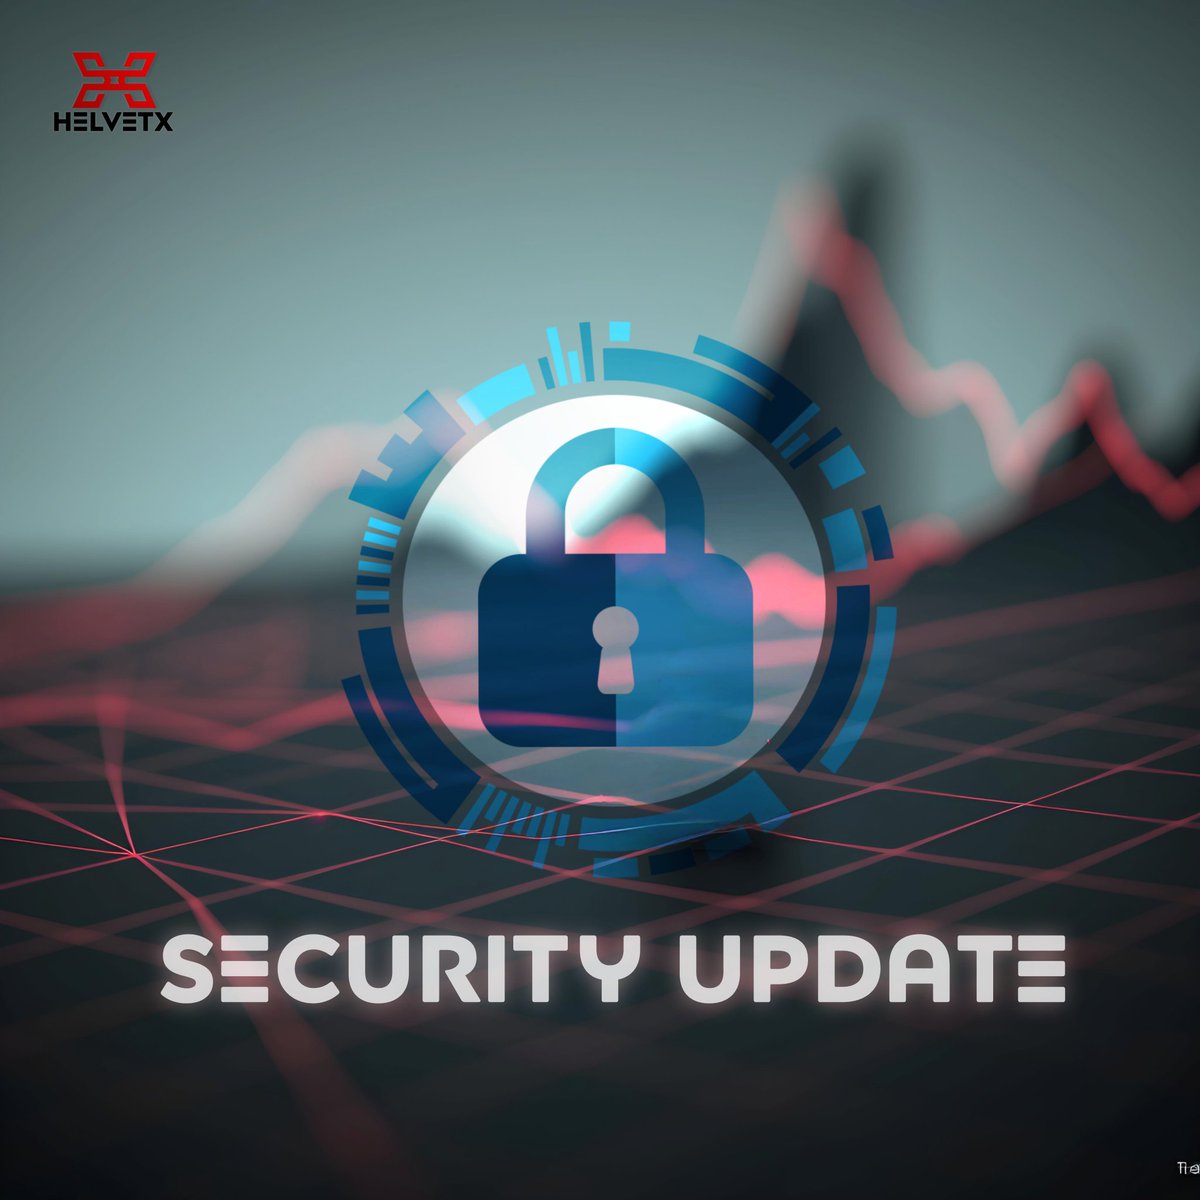 General Security update! ⚫️ Due to the recent negative events on the #XRPL, we inform you that our Airdrop Machine and Dex Machine services will no longer be available for projects without a Blackholed issuer adress for their token! 🔐 One of our key foundations is ensuring the